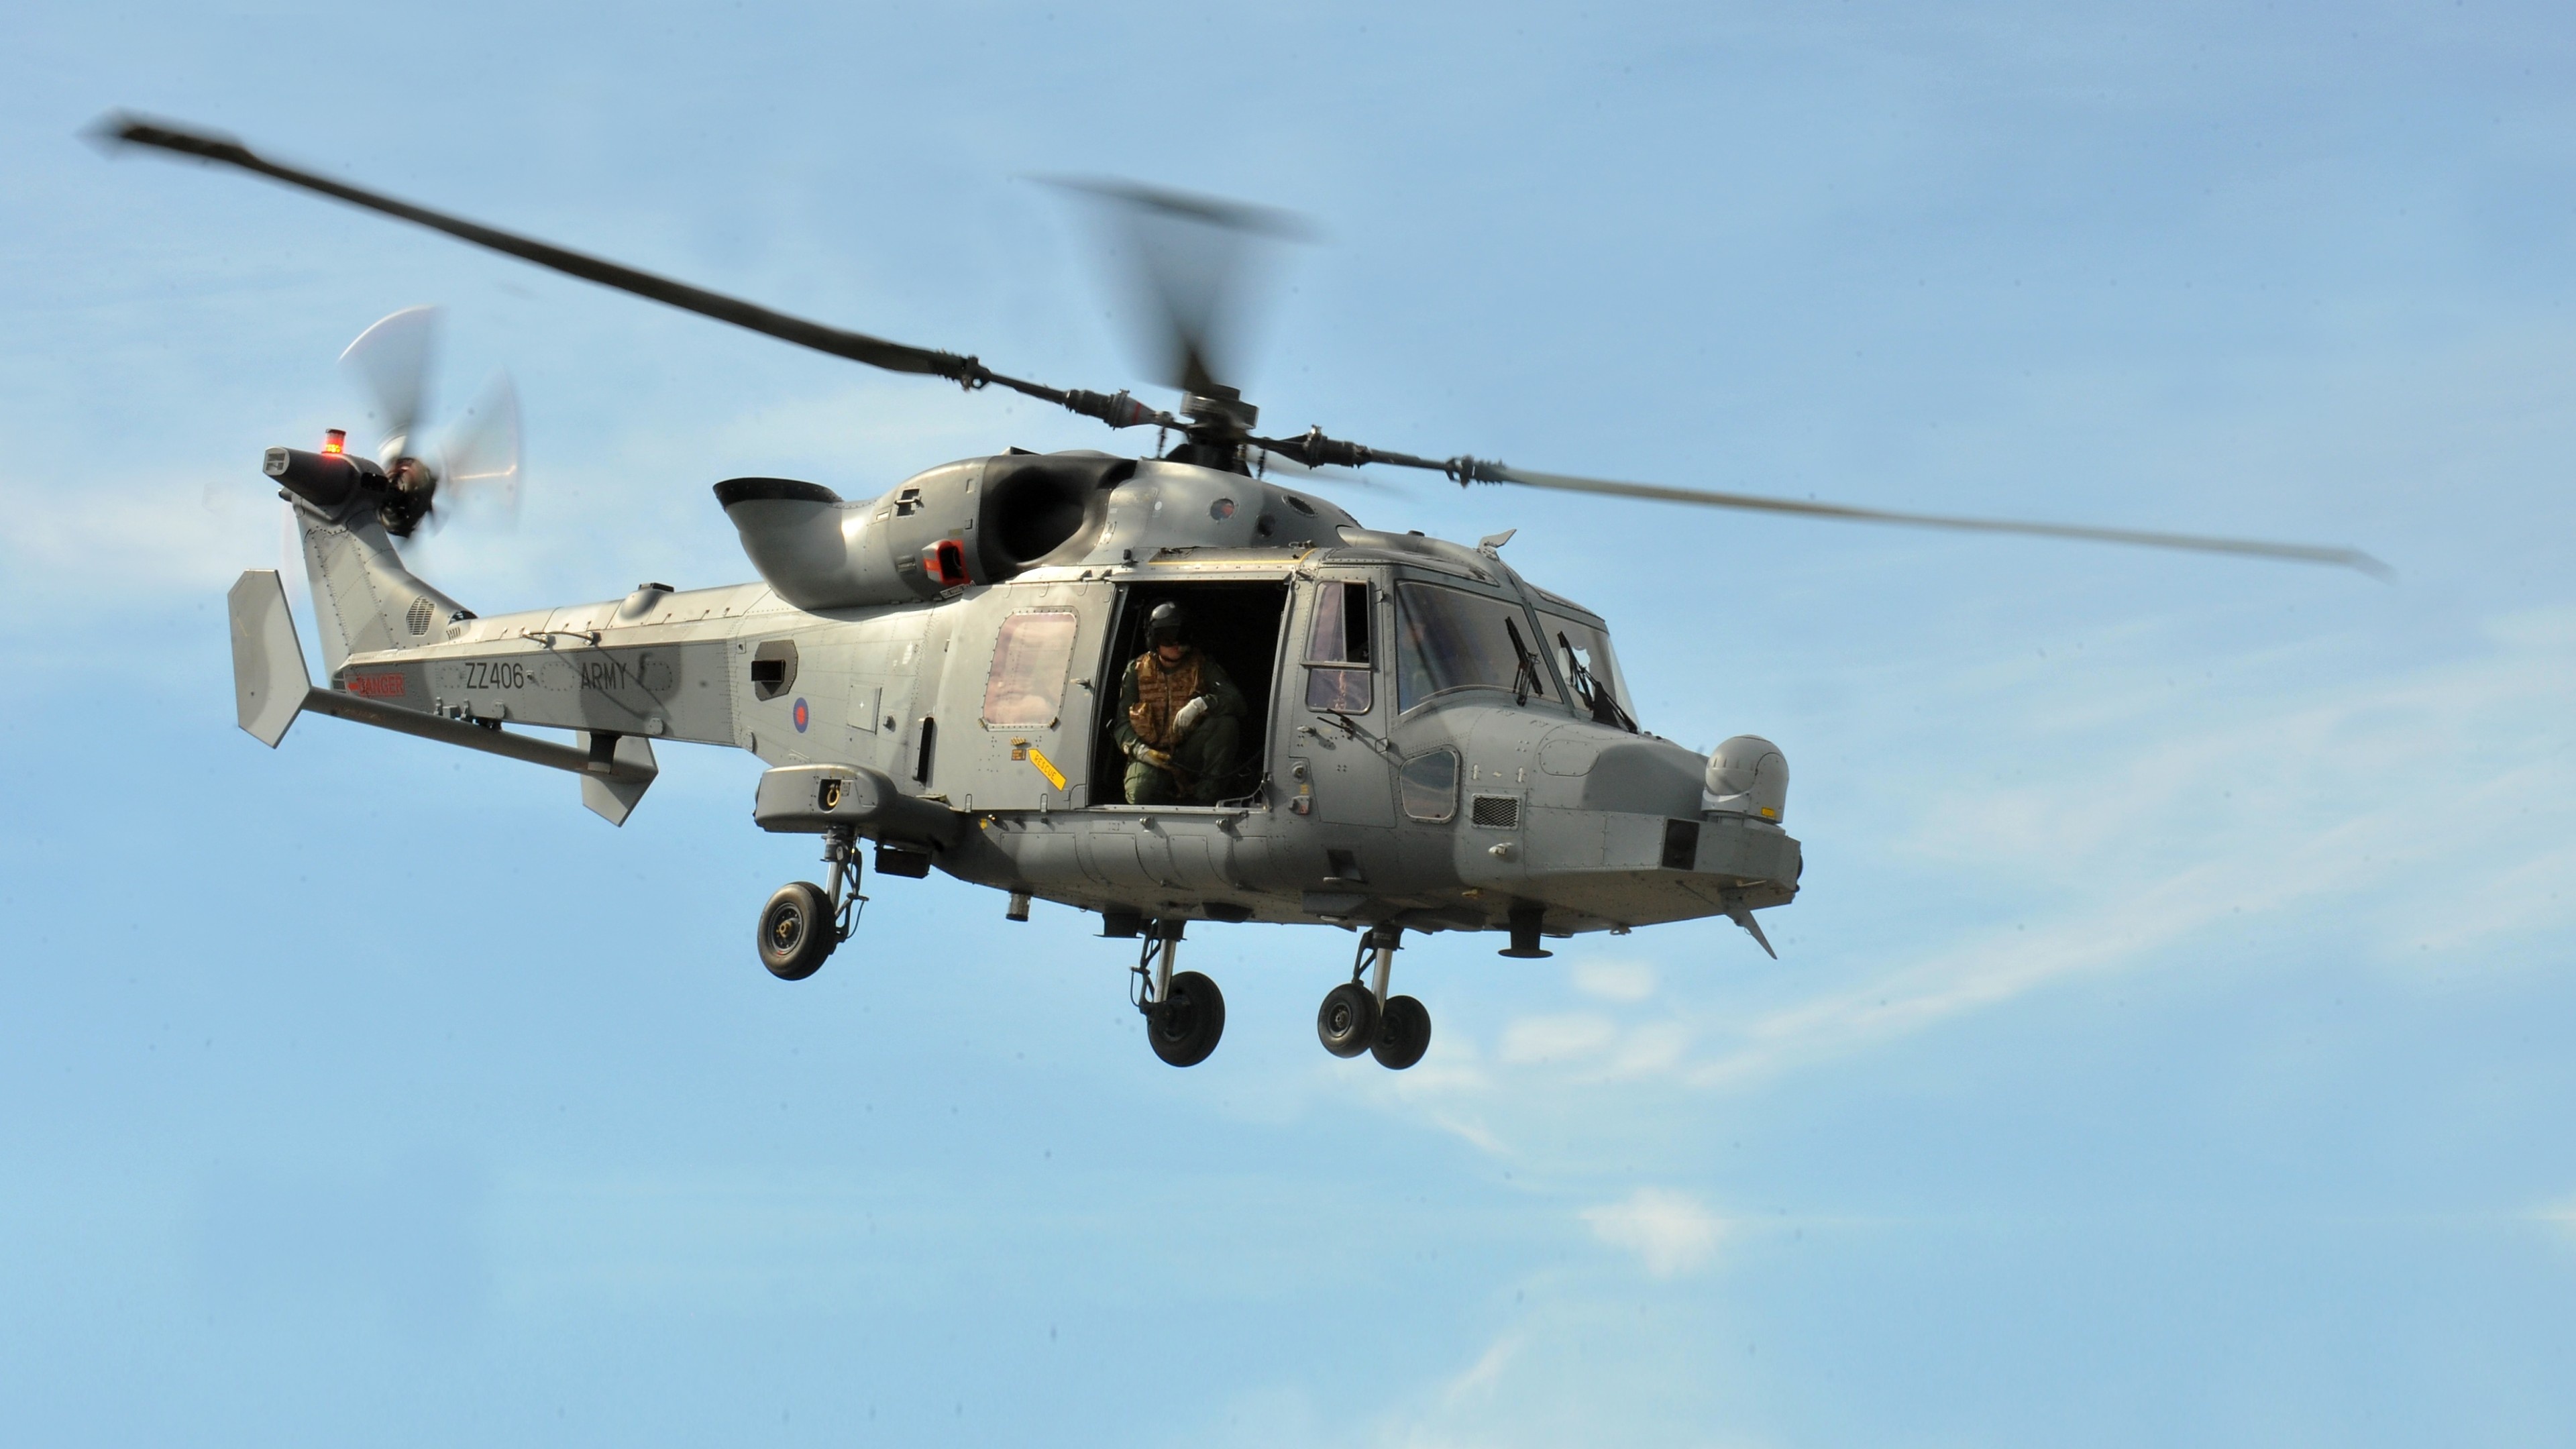 Wallpaper Agusta Westland AW159 Wildcat, AgustaWestland, attack helicopter, Italian Army, Italy, Military #7863 - Page 9 3840x2160